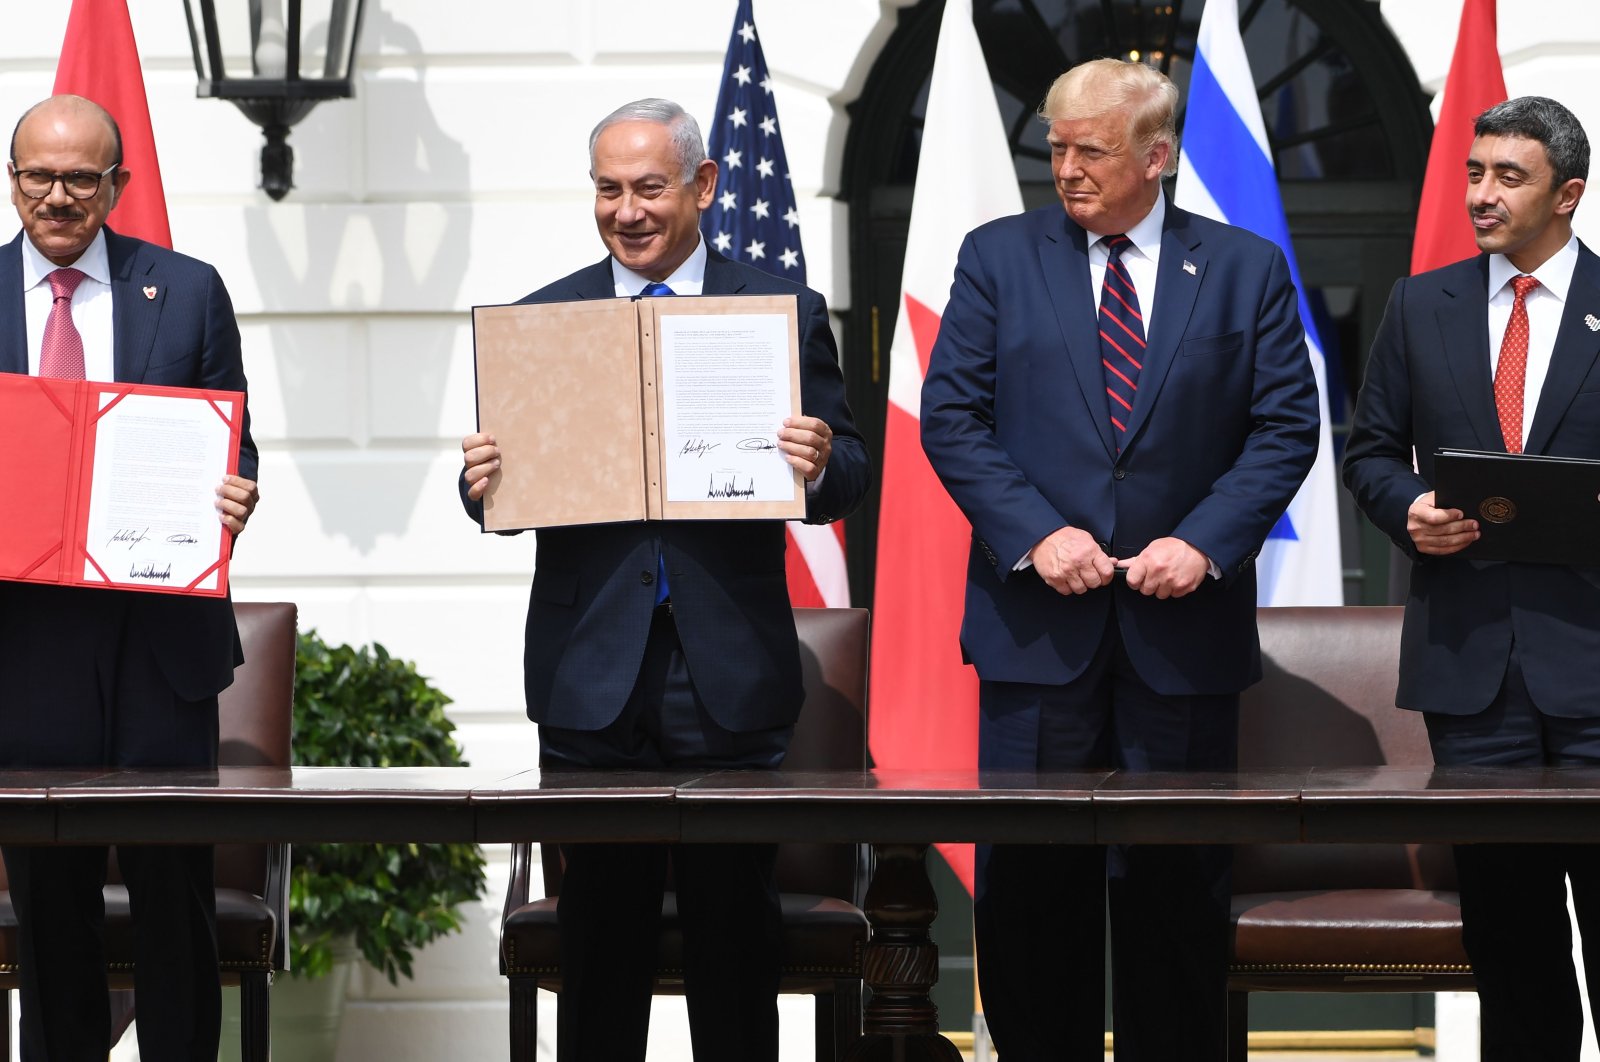 Bahraini Foreign Minister Abdullatif al-Zayani (L), Israeli Prime Minister Benjamin Netanyahu (CL), US President Donald Trump (CR) and UAE Foreign Minister Abdullah bin Zayed Al-Nahyan hold up documents after participating in the signing of the Abraham Accords at the White House in Washington, Sept. 15, 2020. (AFP Photo)